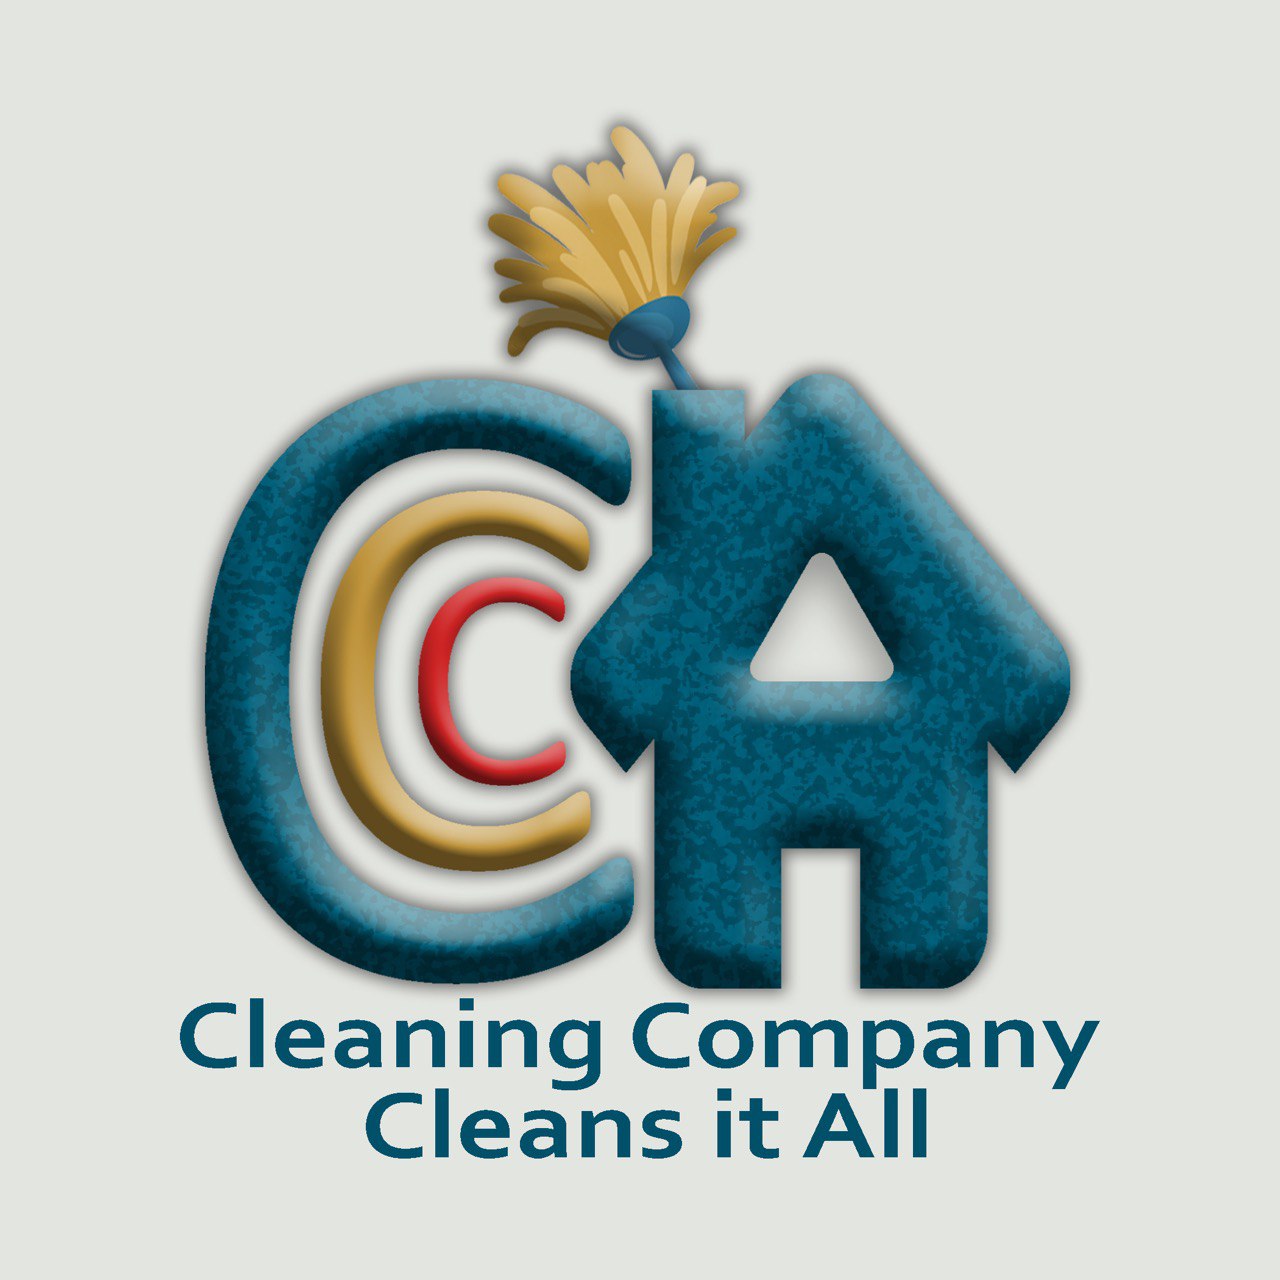 Logo of Cleaning Company Cleans it All CCCA